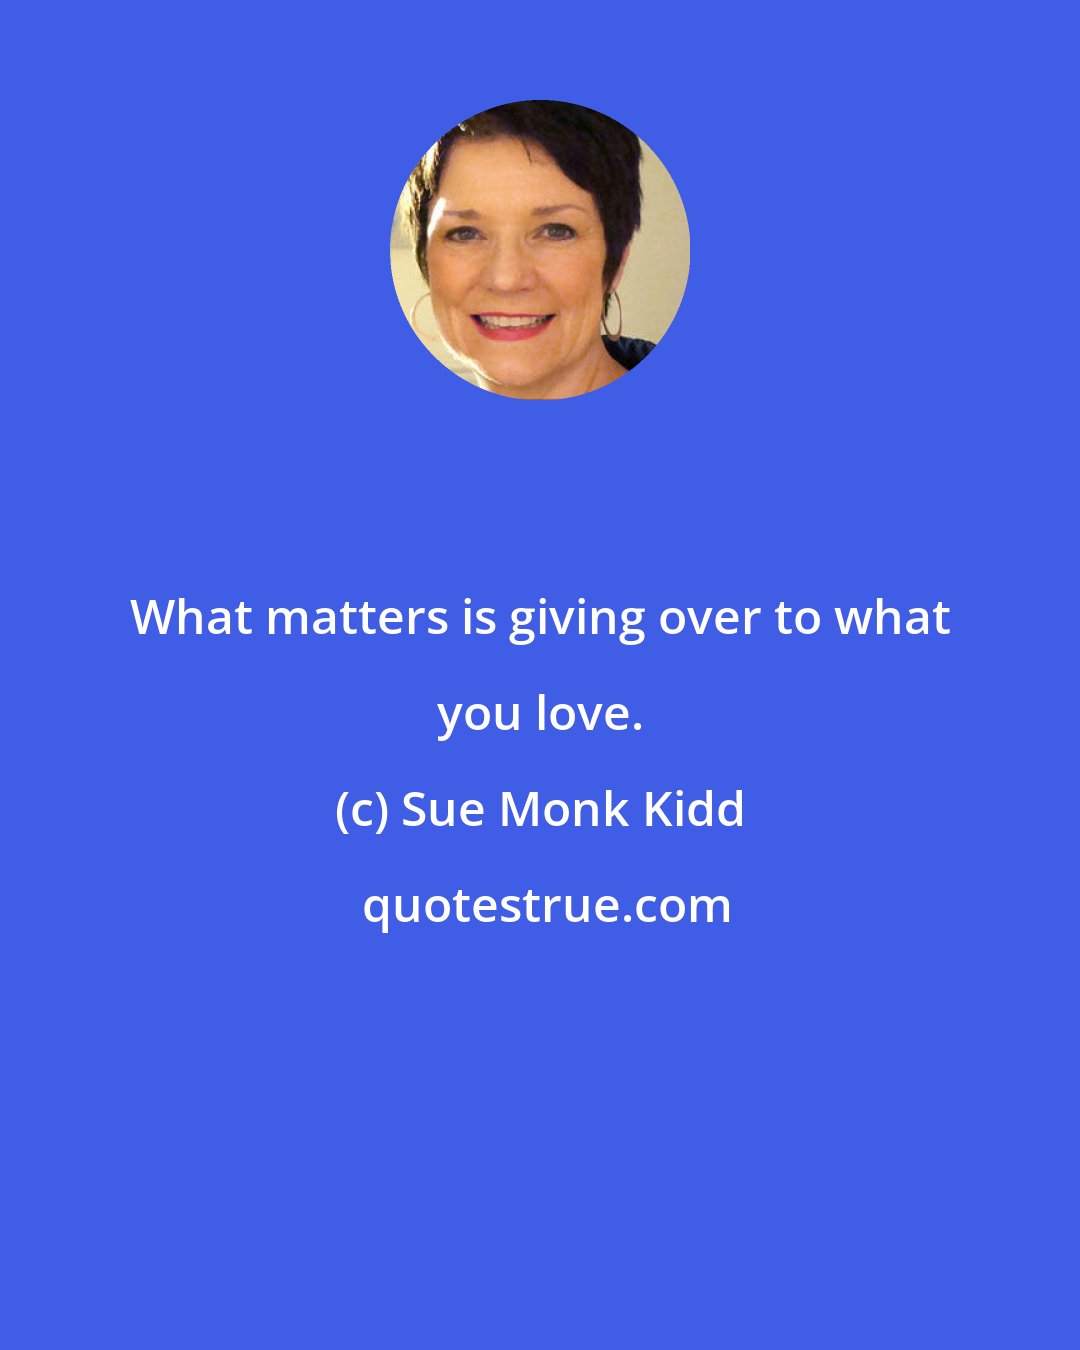 Sue Monk Kidd: What matters is giving over to what you love.